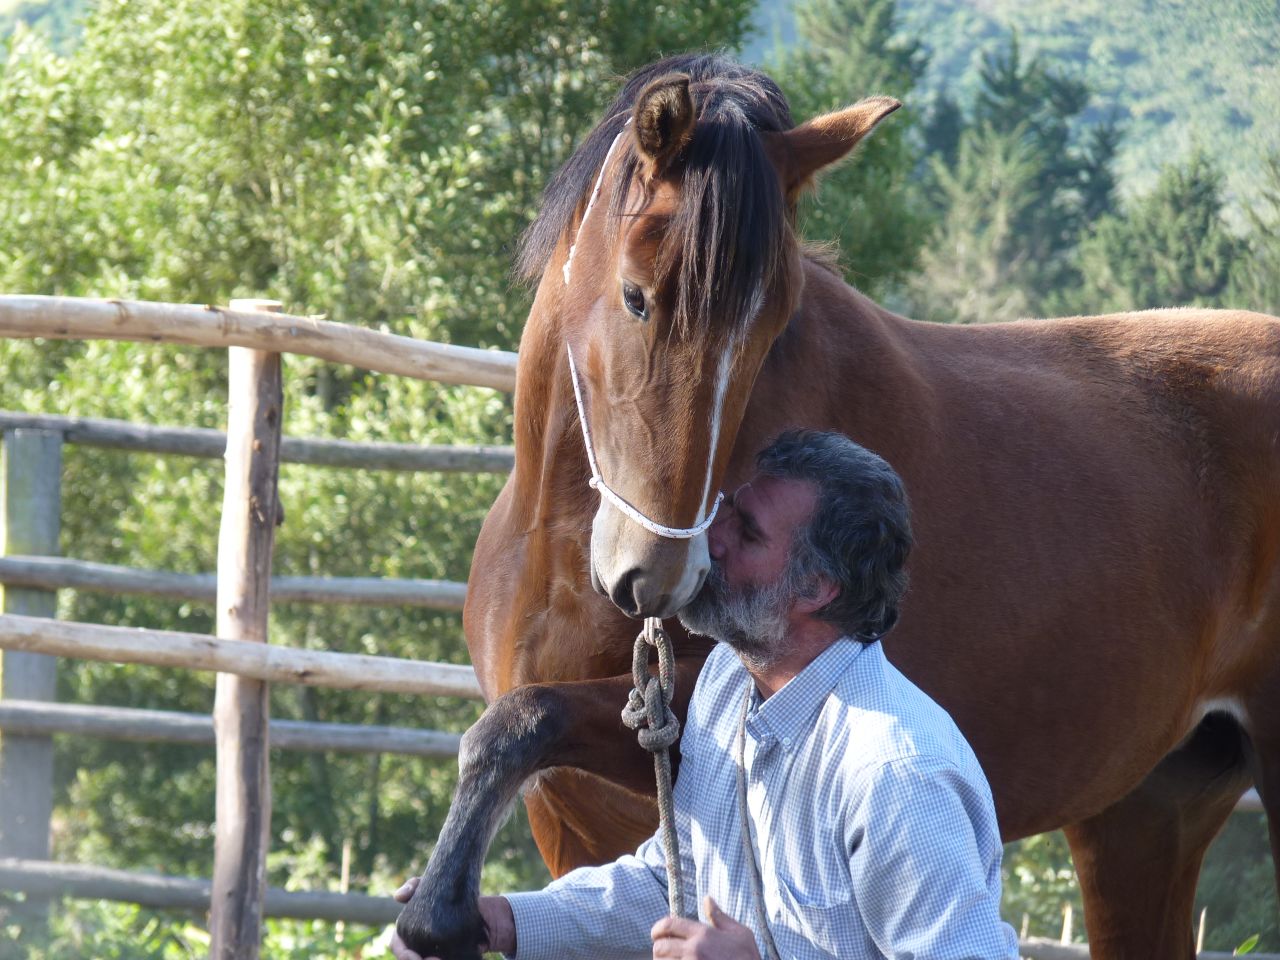 The Scarpatis' aim is to connect with horses "on their frequency in the frequency of nature."